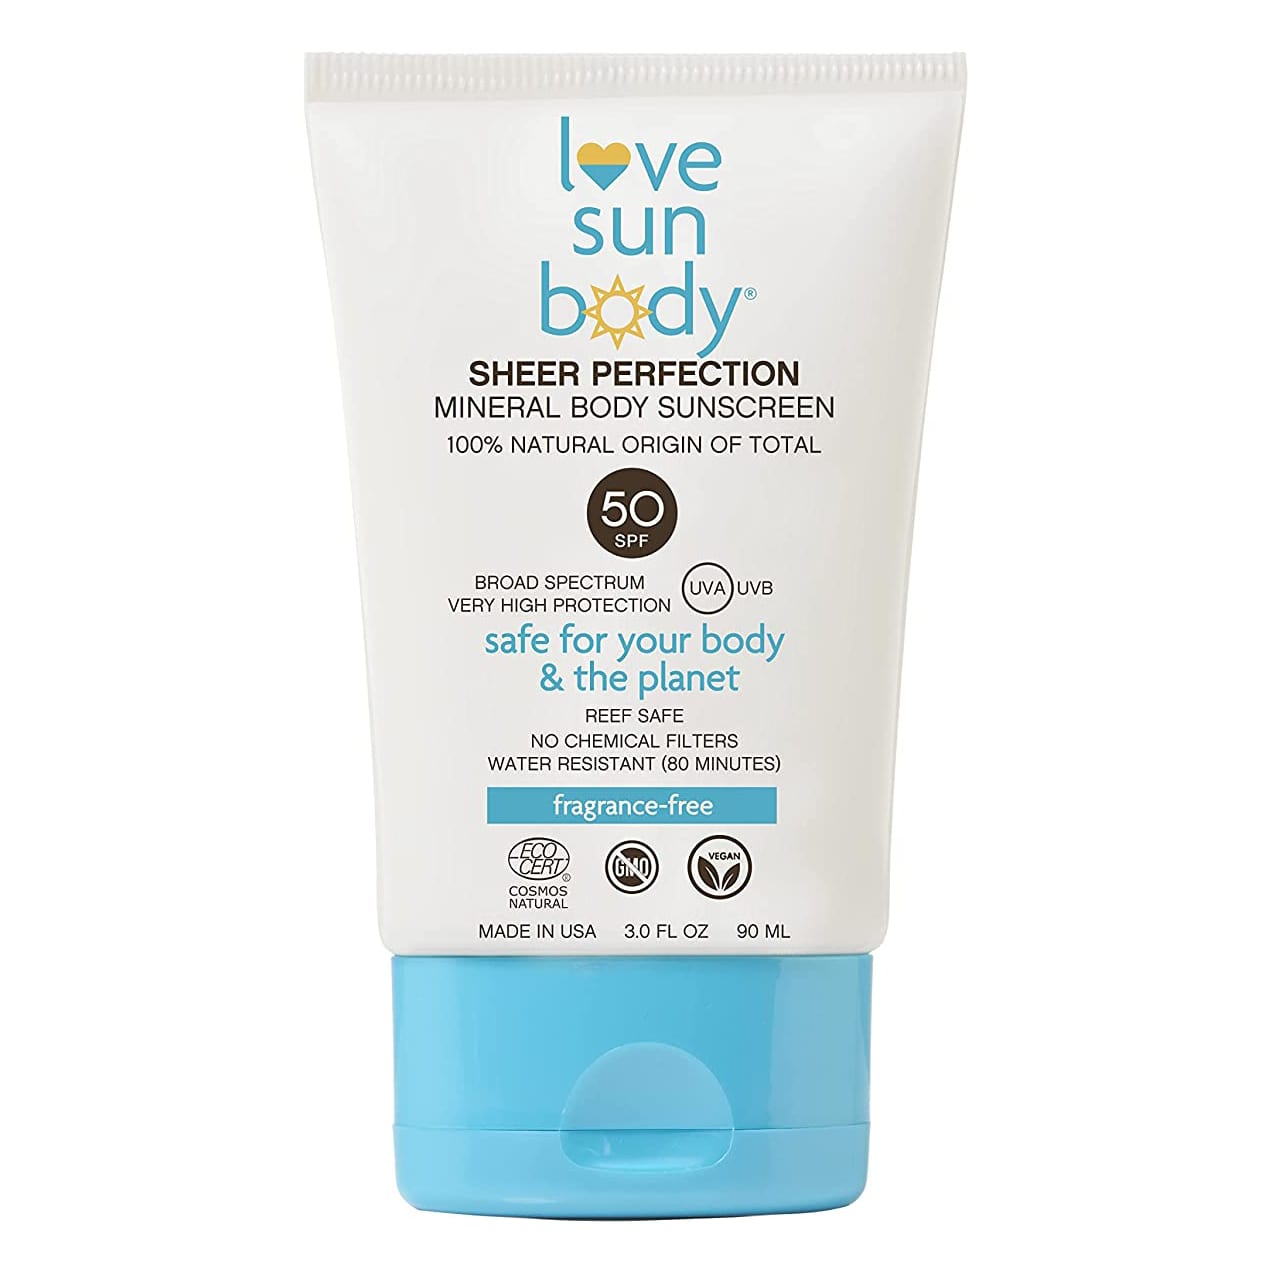 Sheer Perfection Mineral Body Sunscreen